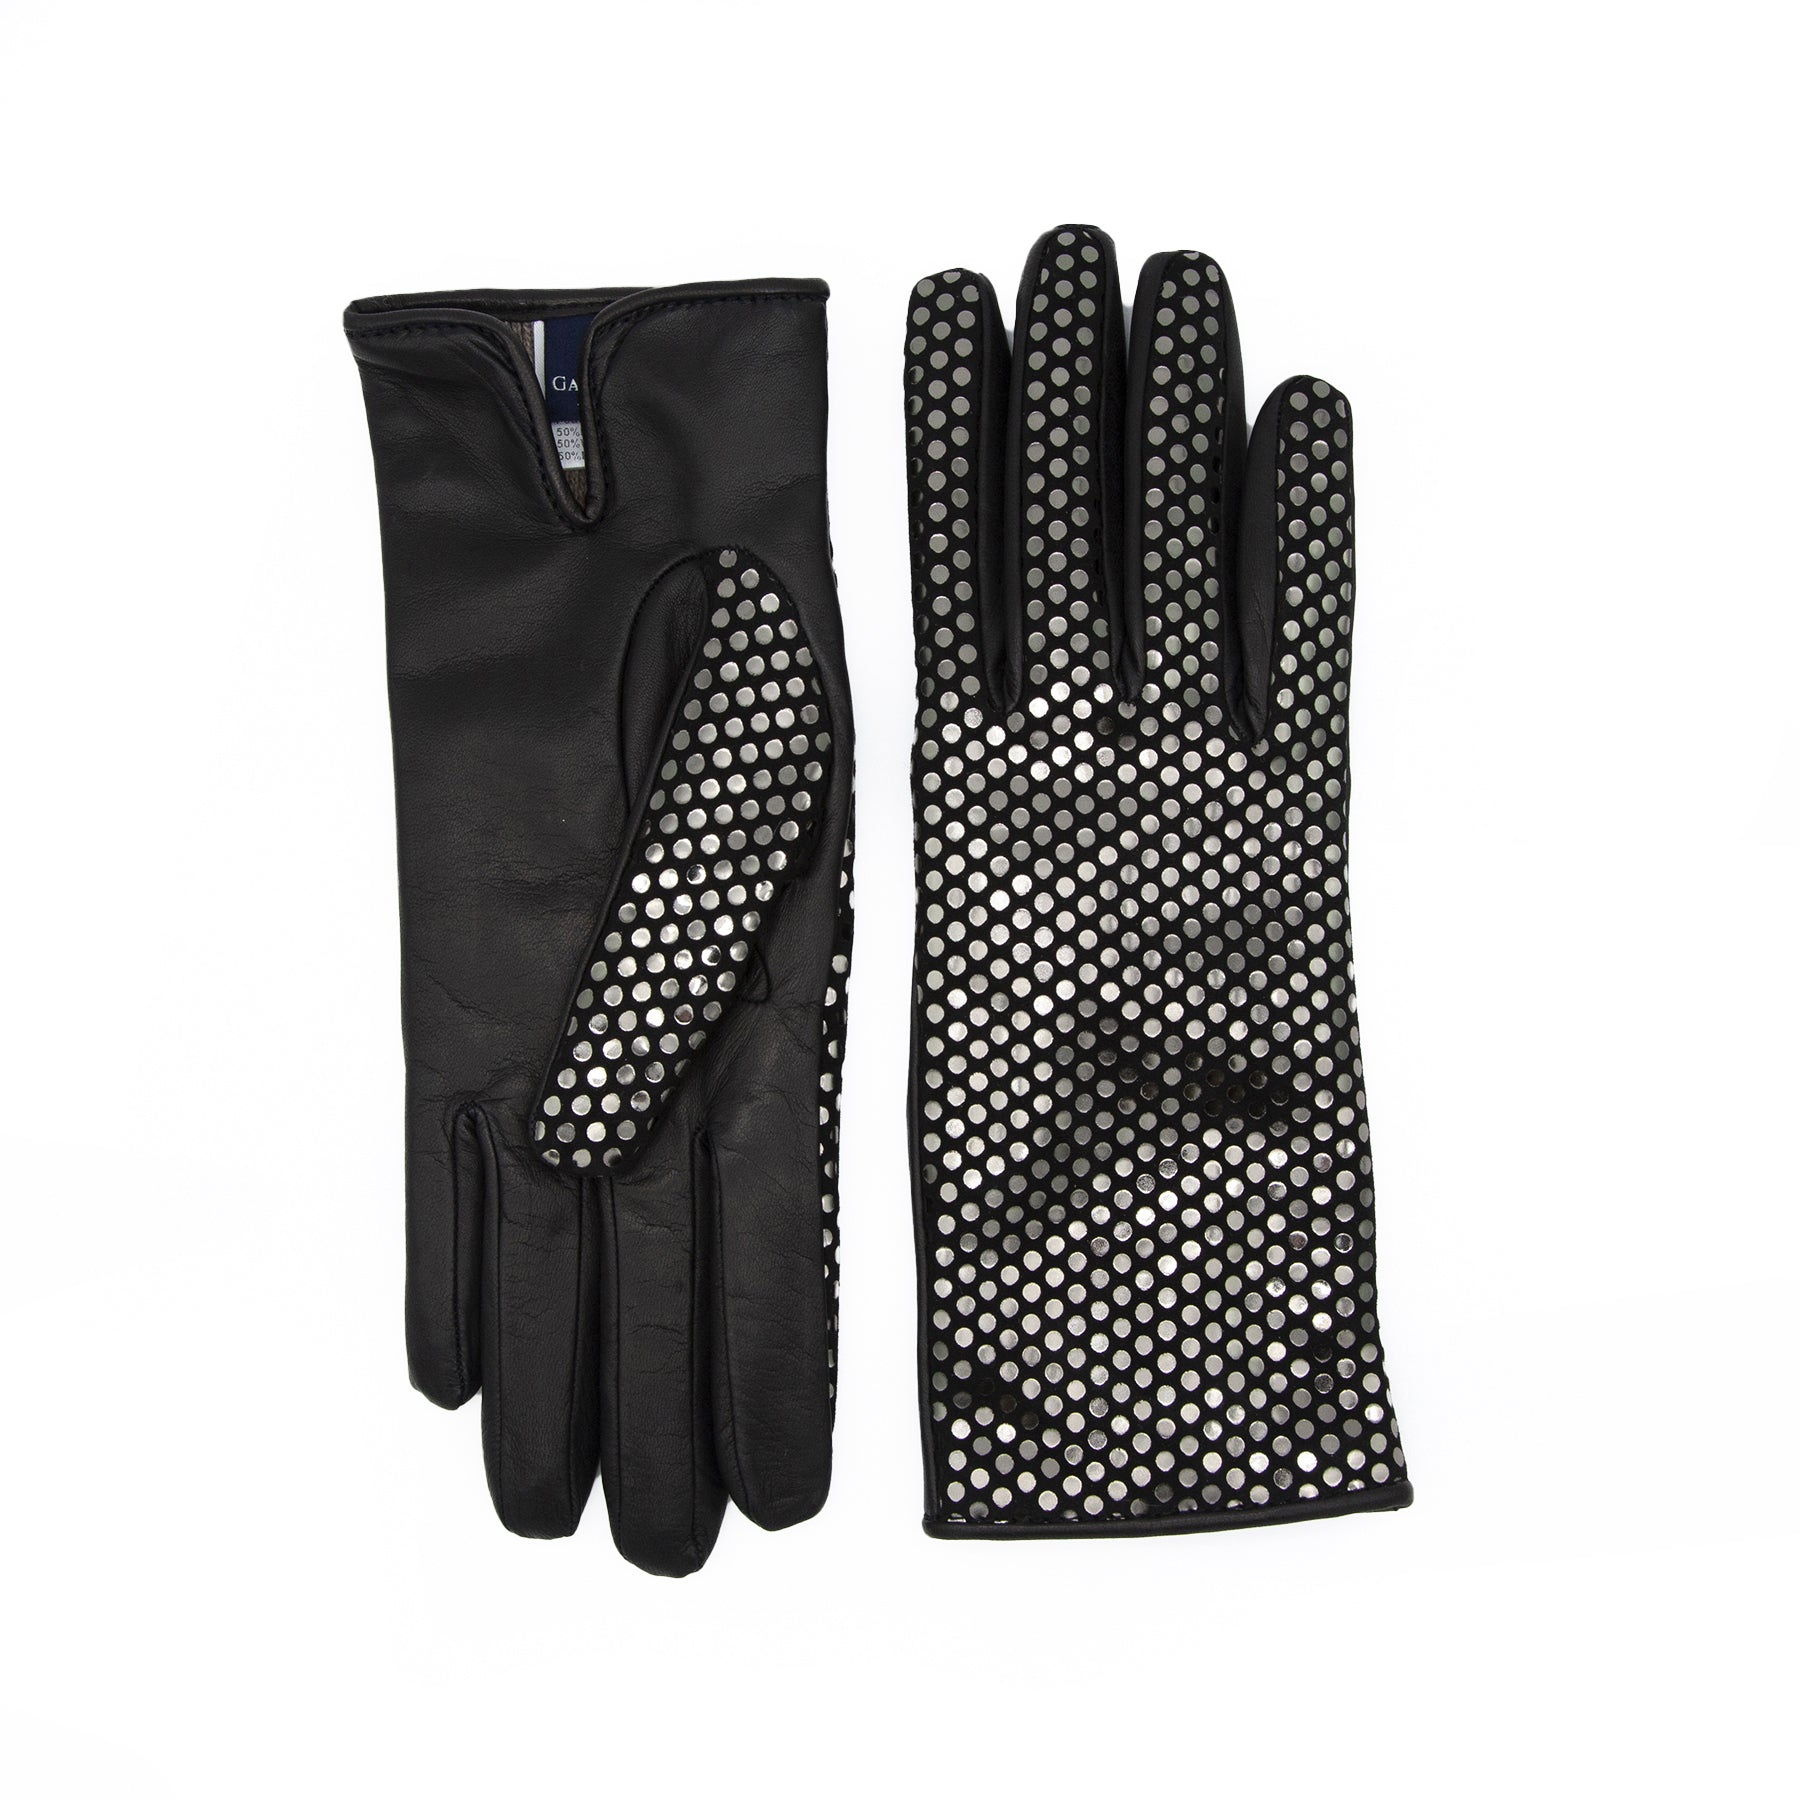 Women's black nappa leather gloves with a polka dot suede back